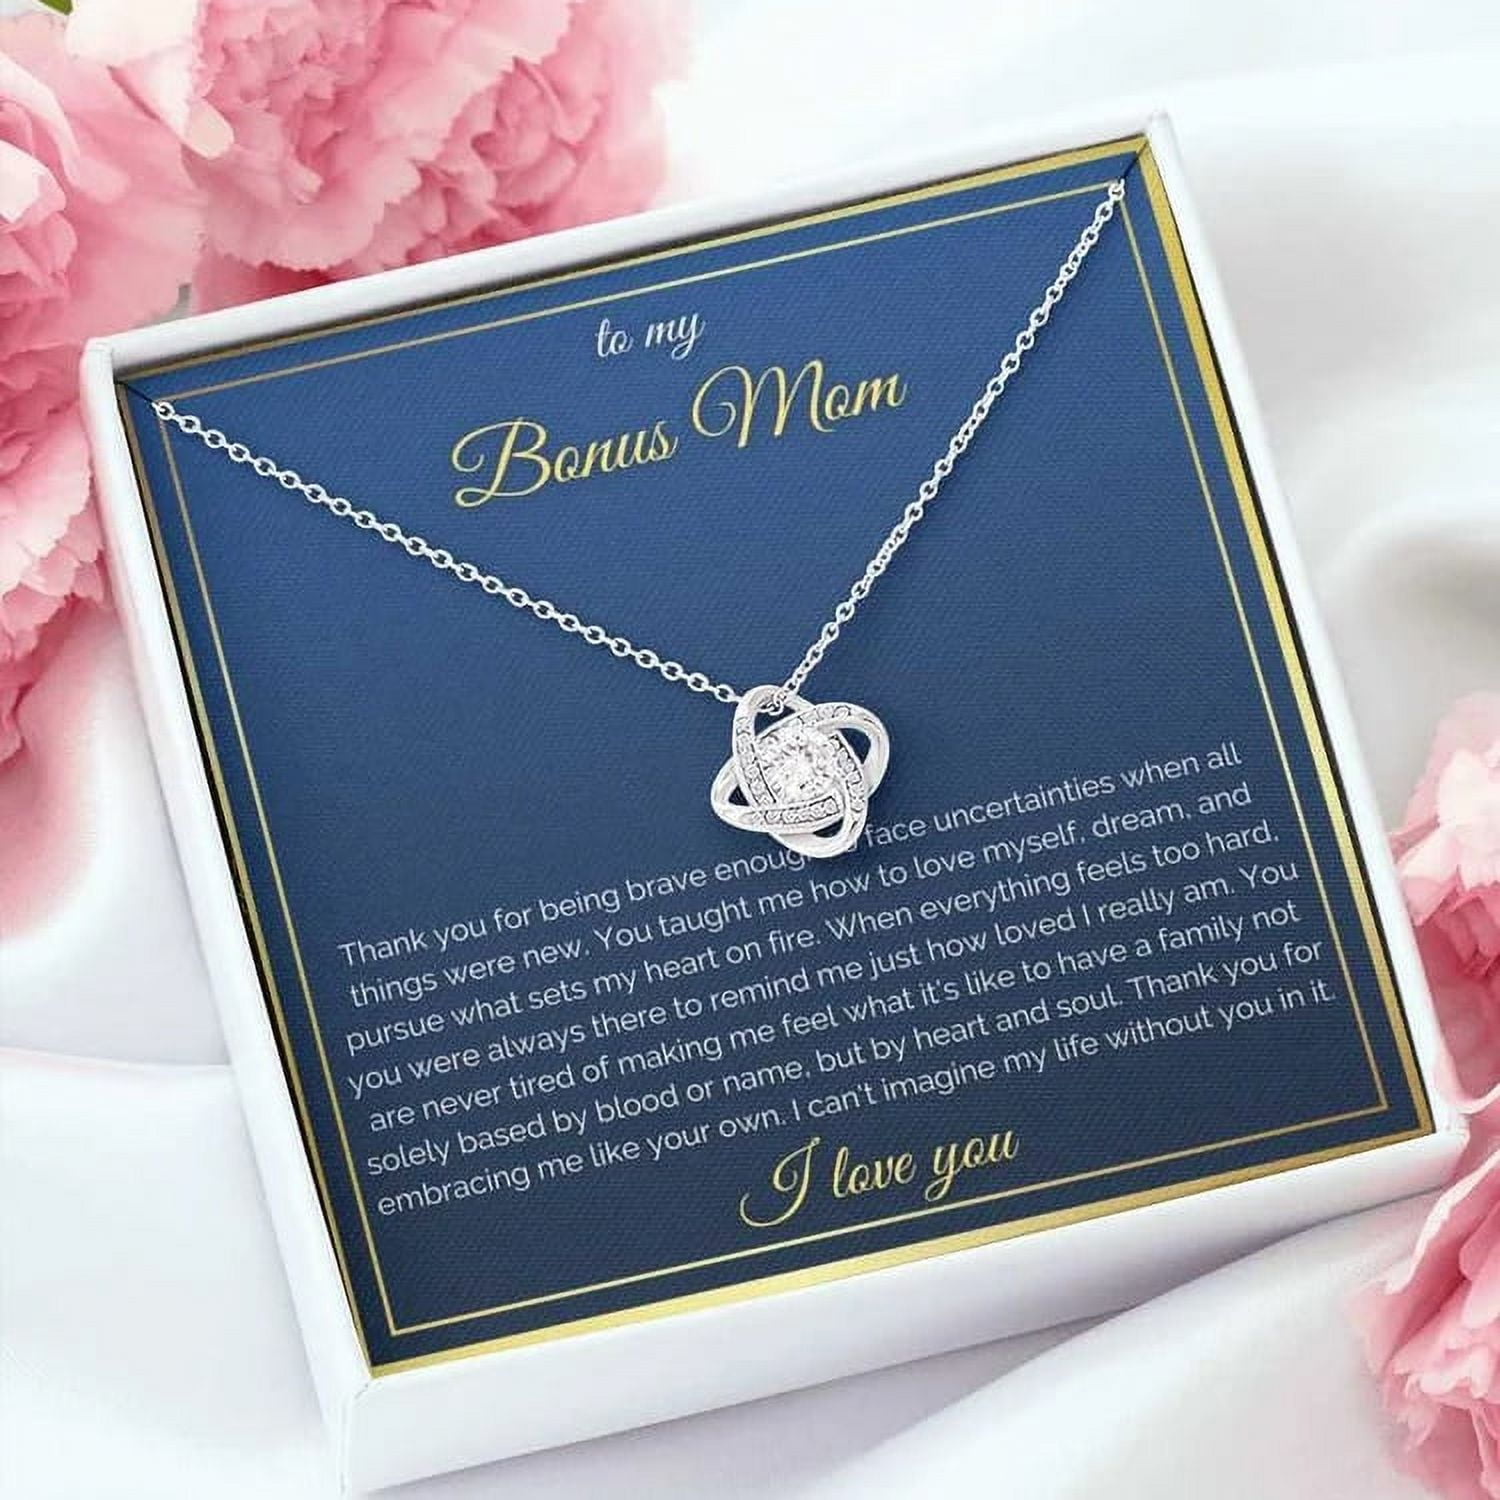 Bonus Mom Gift for Stepmom, Step Mother Gift for Stepmom Necklace, Stepmom Wedding Gift from Bride, Christmas Gifts, Mother's Day Gift Two Toned Box